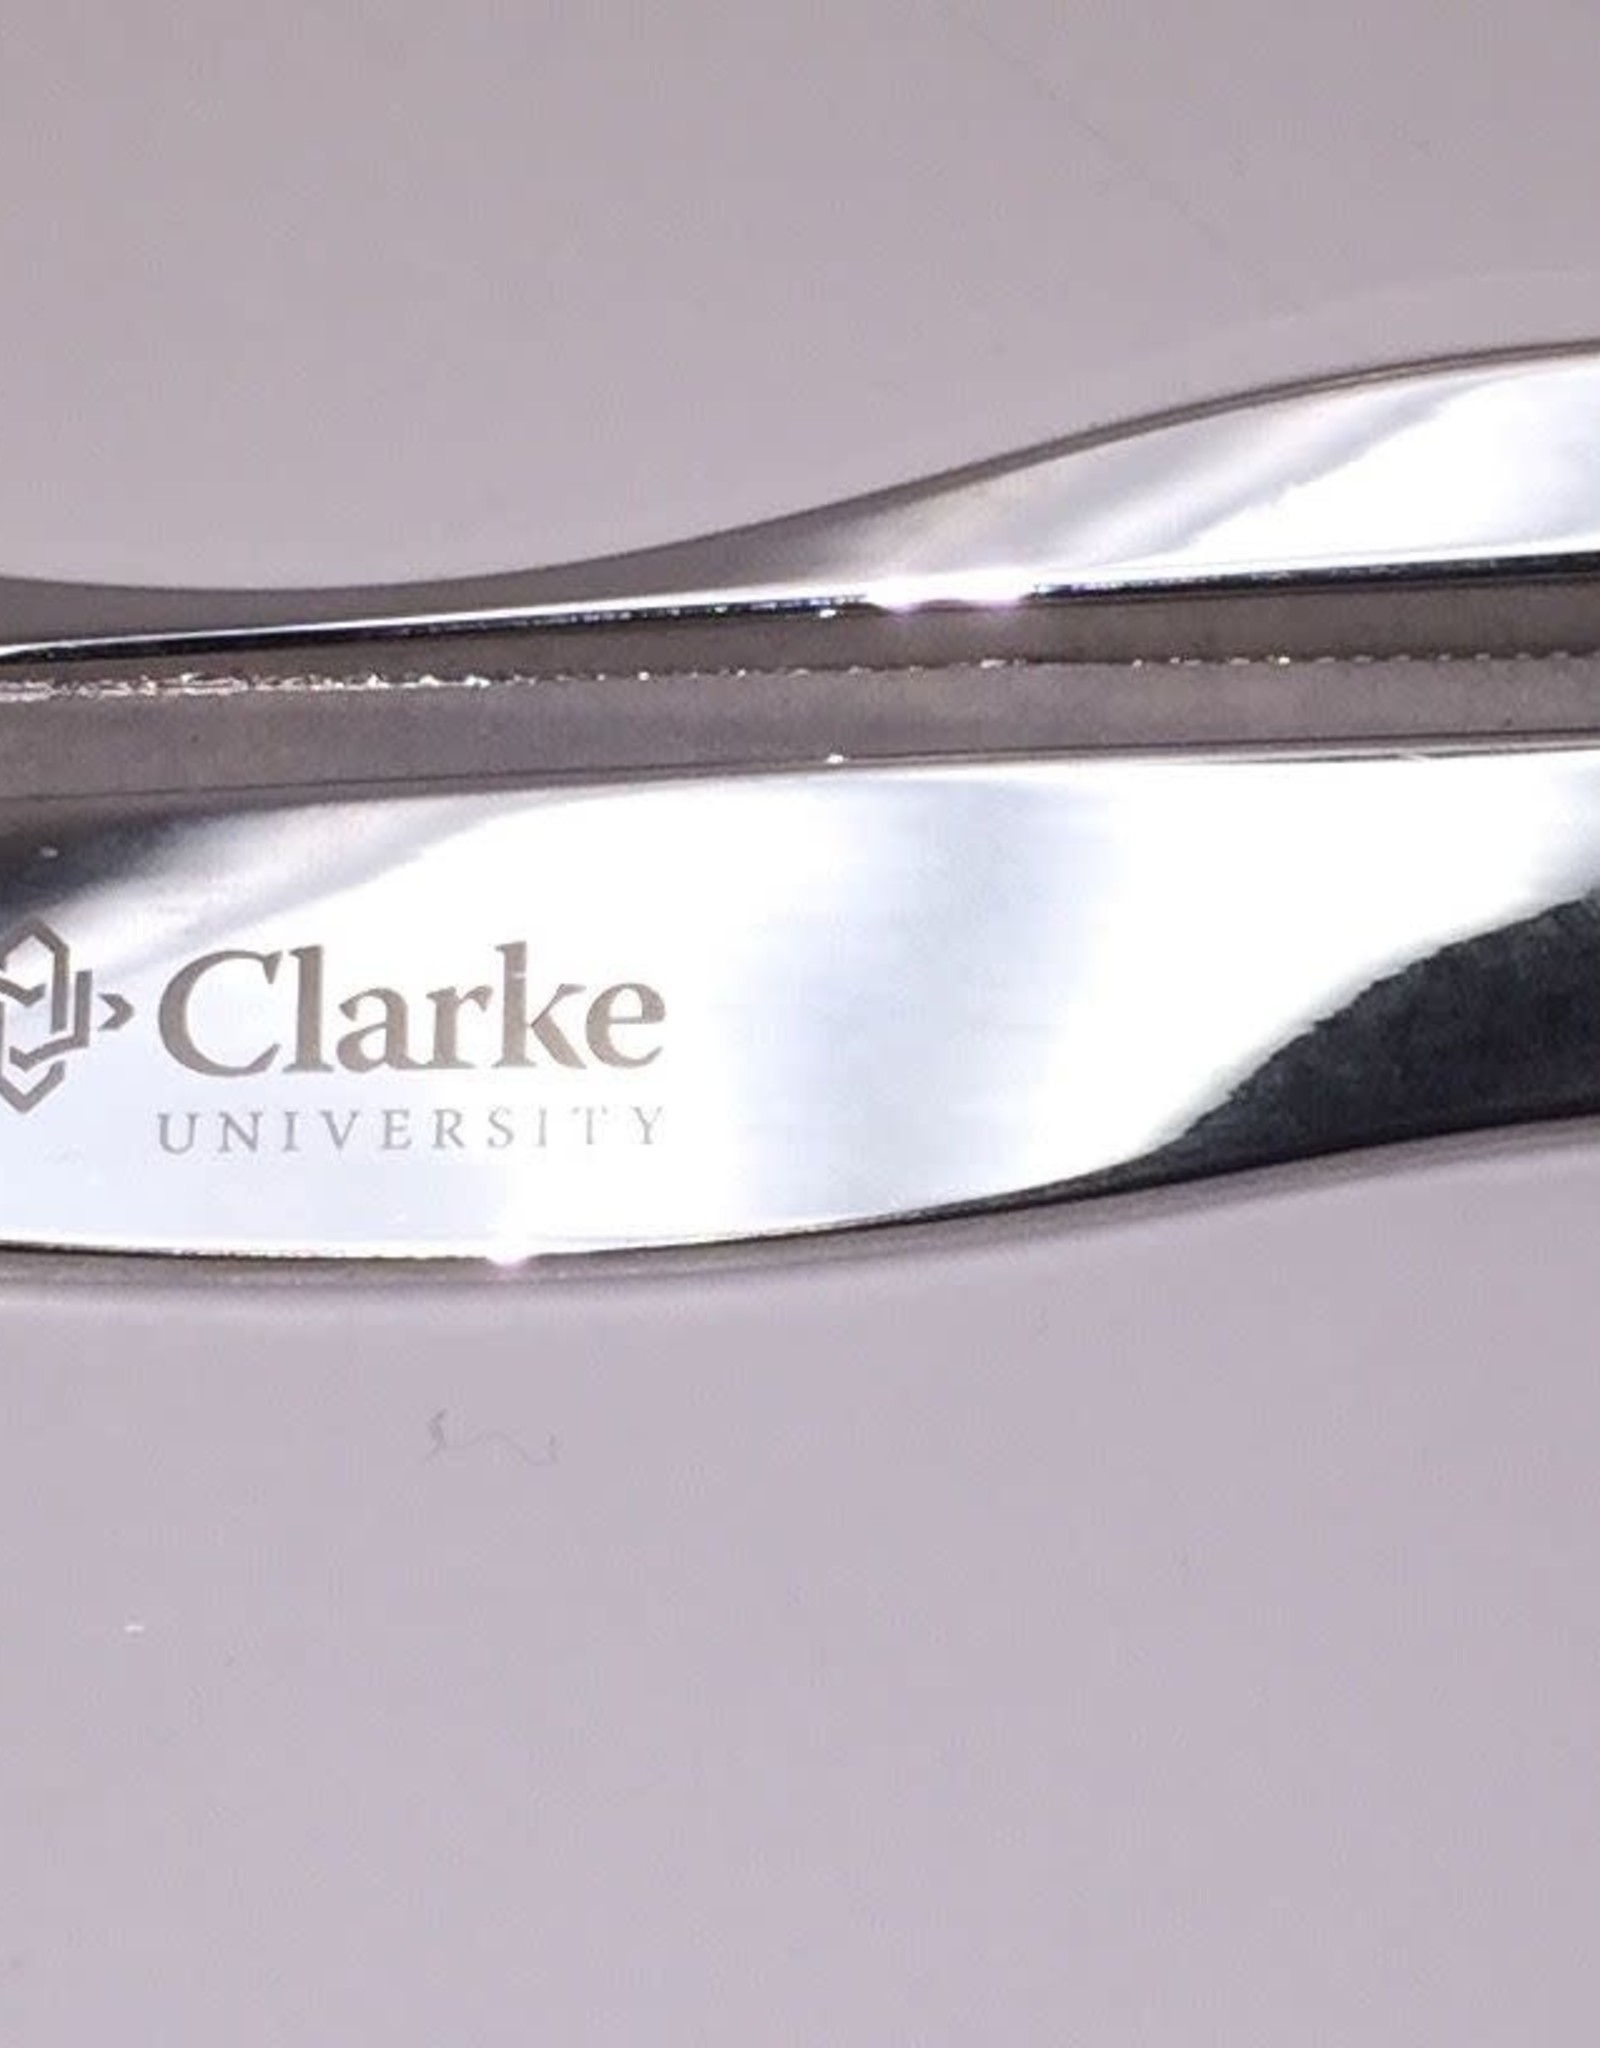 Clarke University Silver Business Card Stand